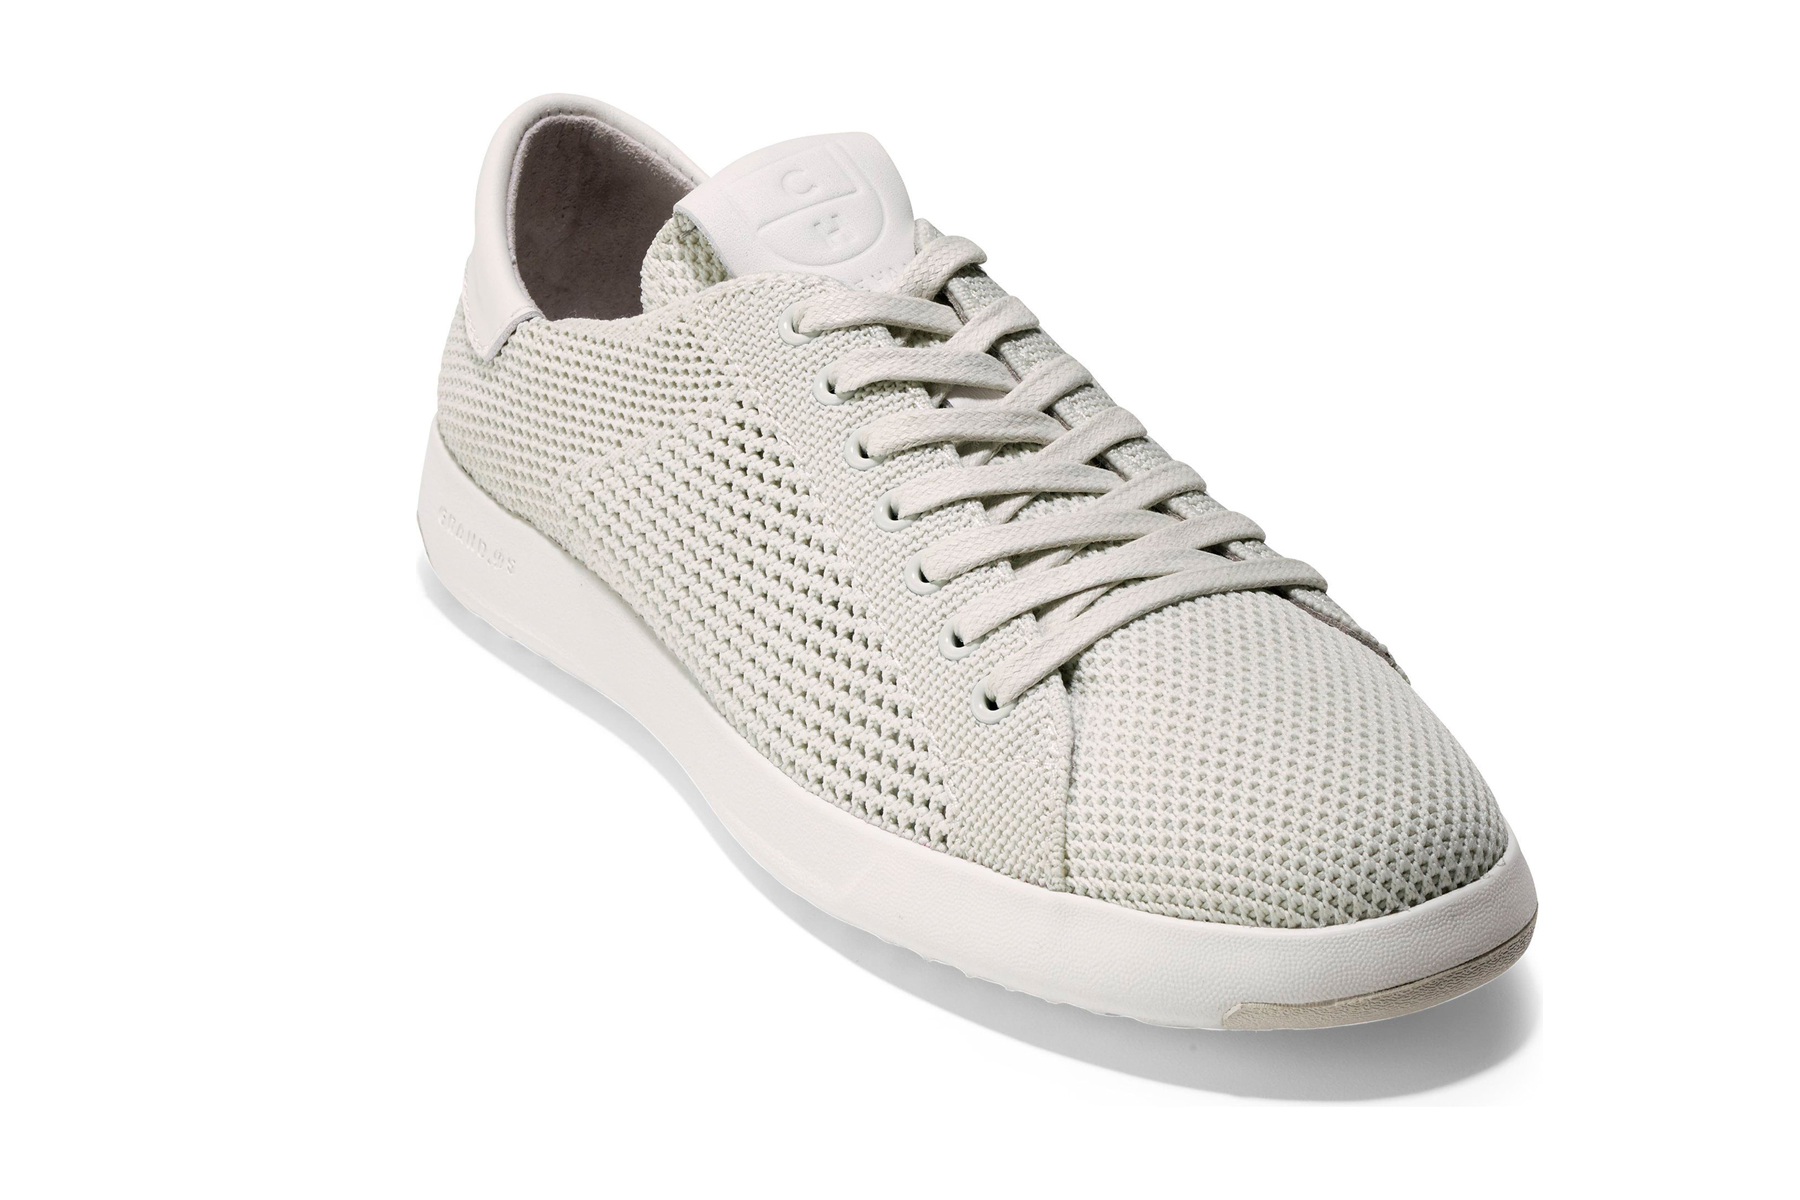 9 Best Breathable Sneakers for Women Over 50